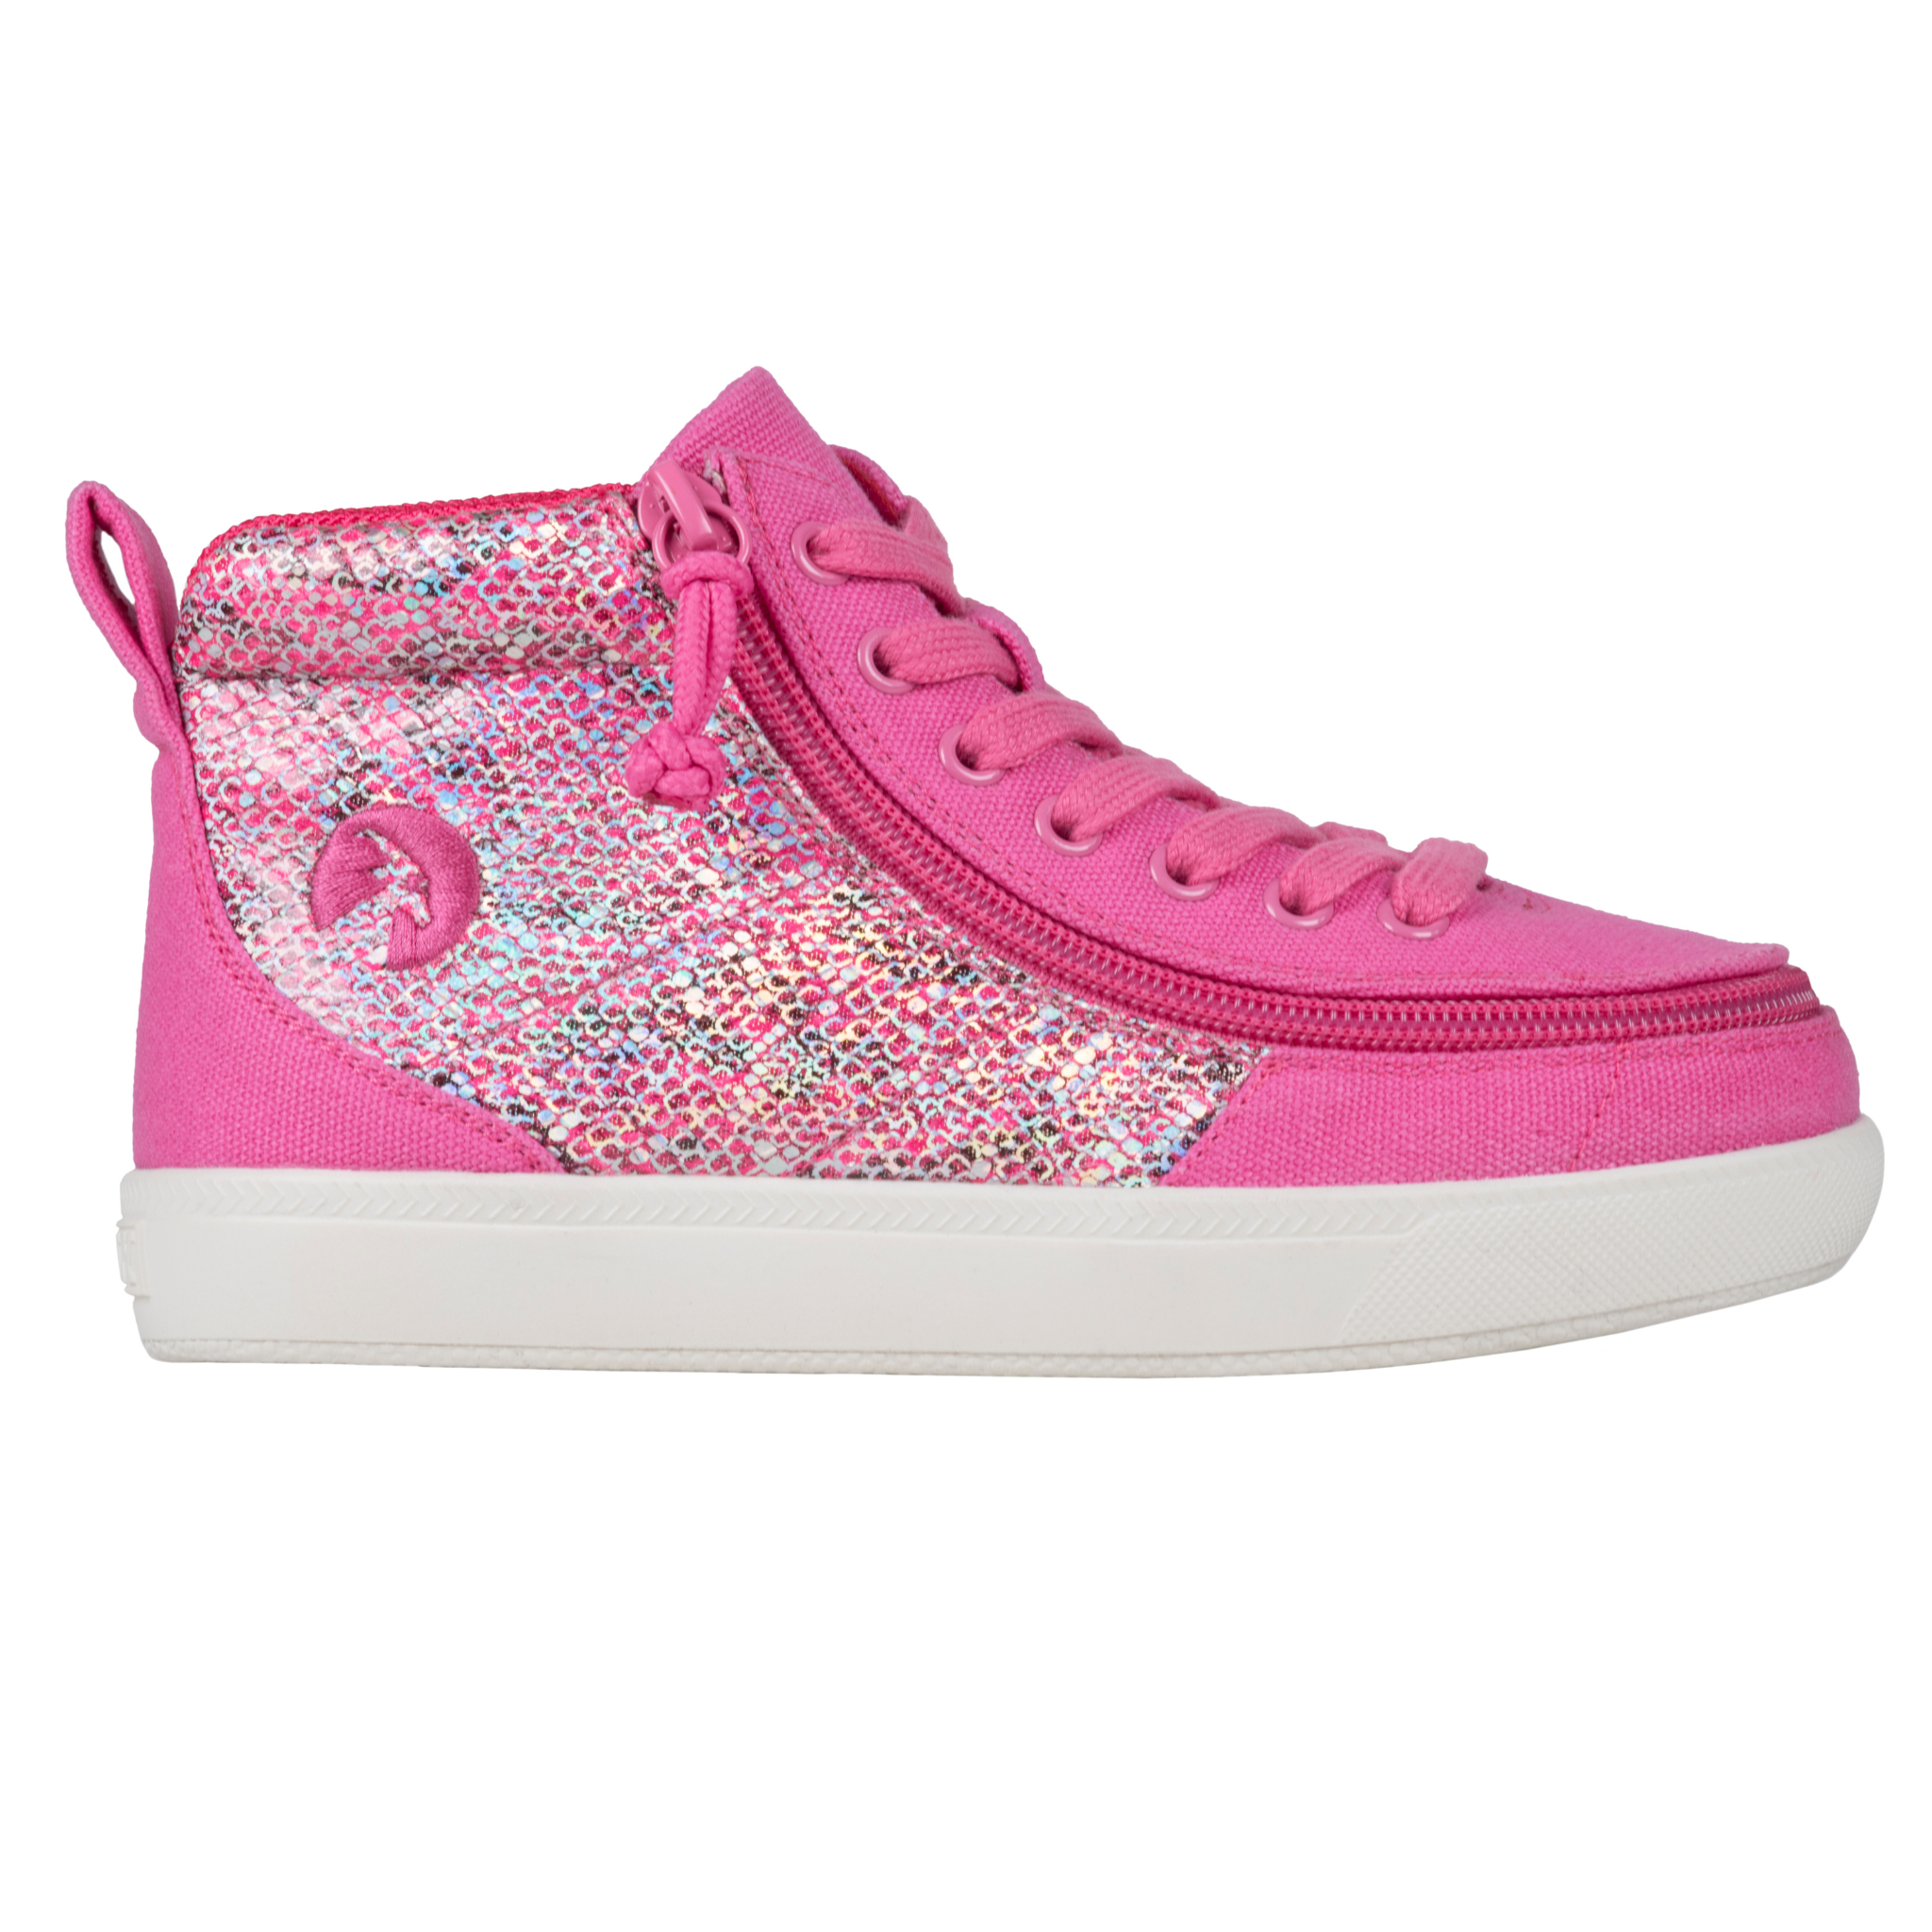 Billy Footwear (Kids) DR Fit - Street High Top DR Fuchsia Snake Canvas Shoes